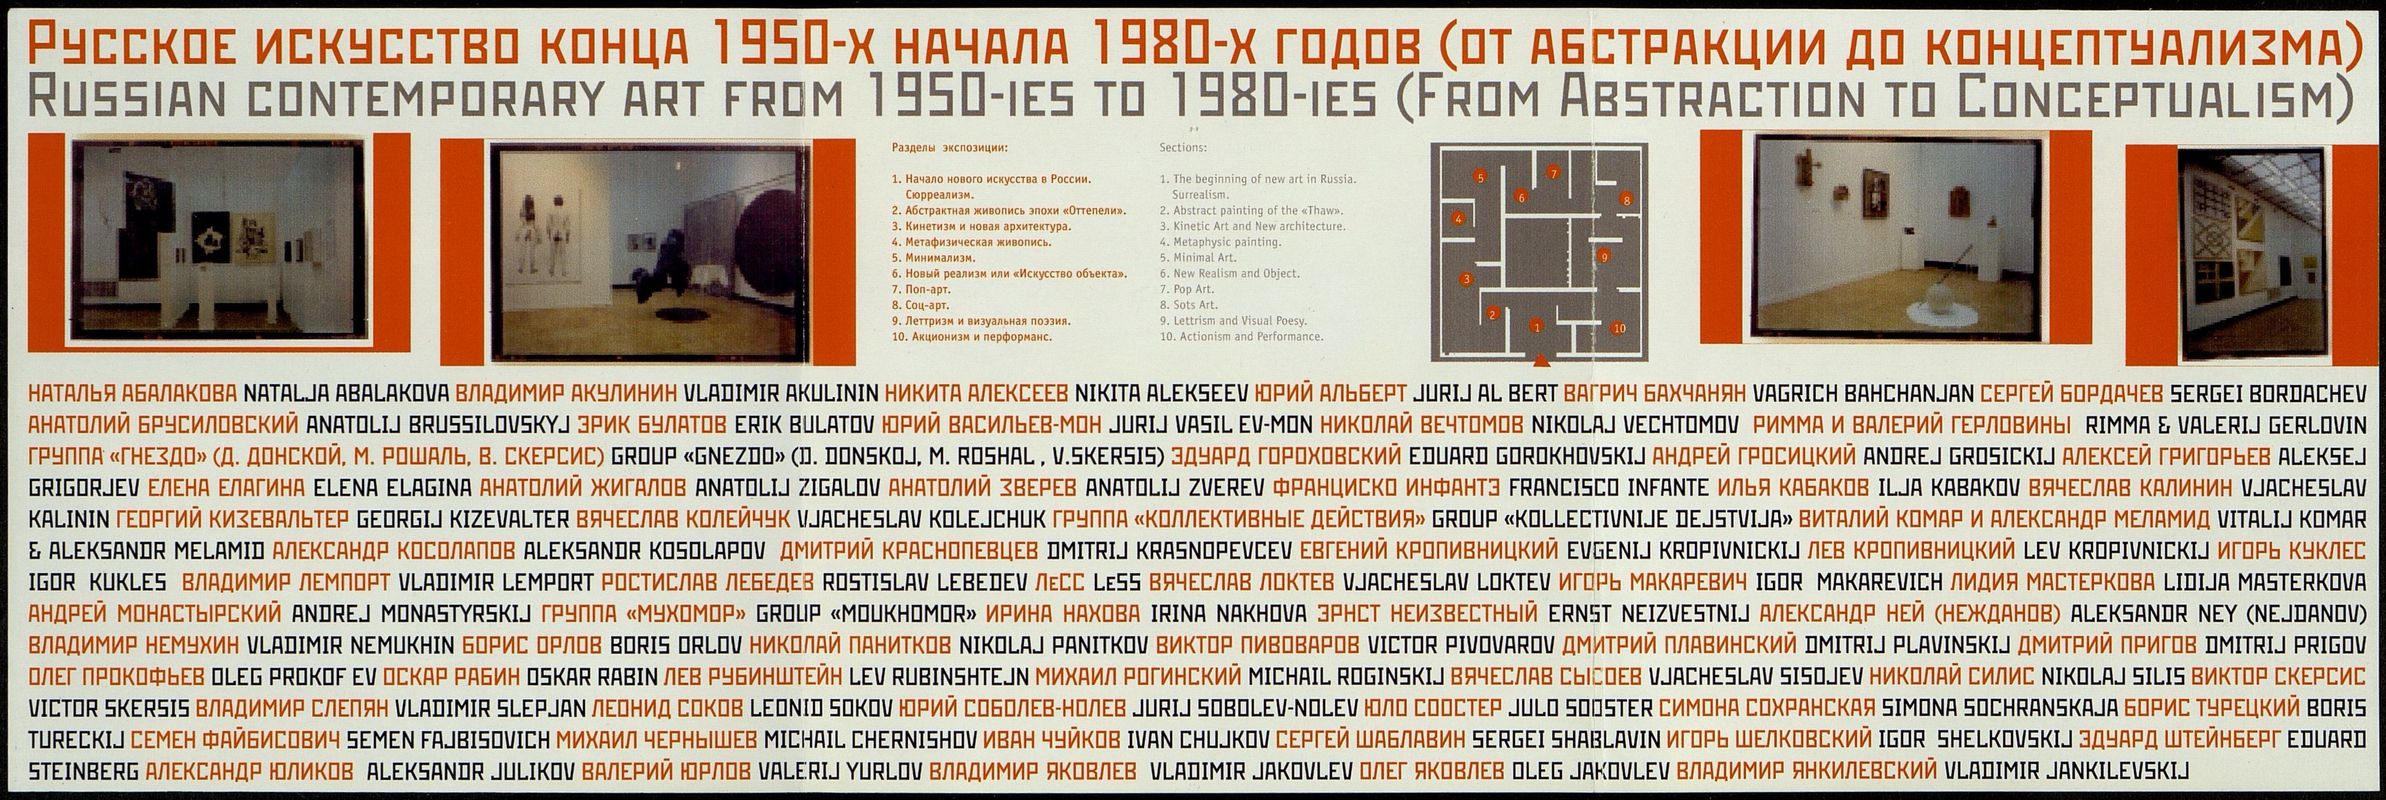 Russian contemporary art from 1950-ies to 1980-ies (From Abstraction to Conceptualism)